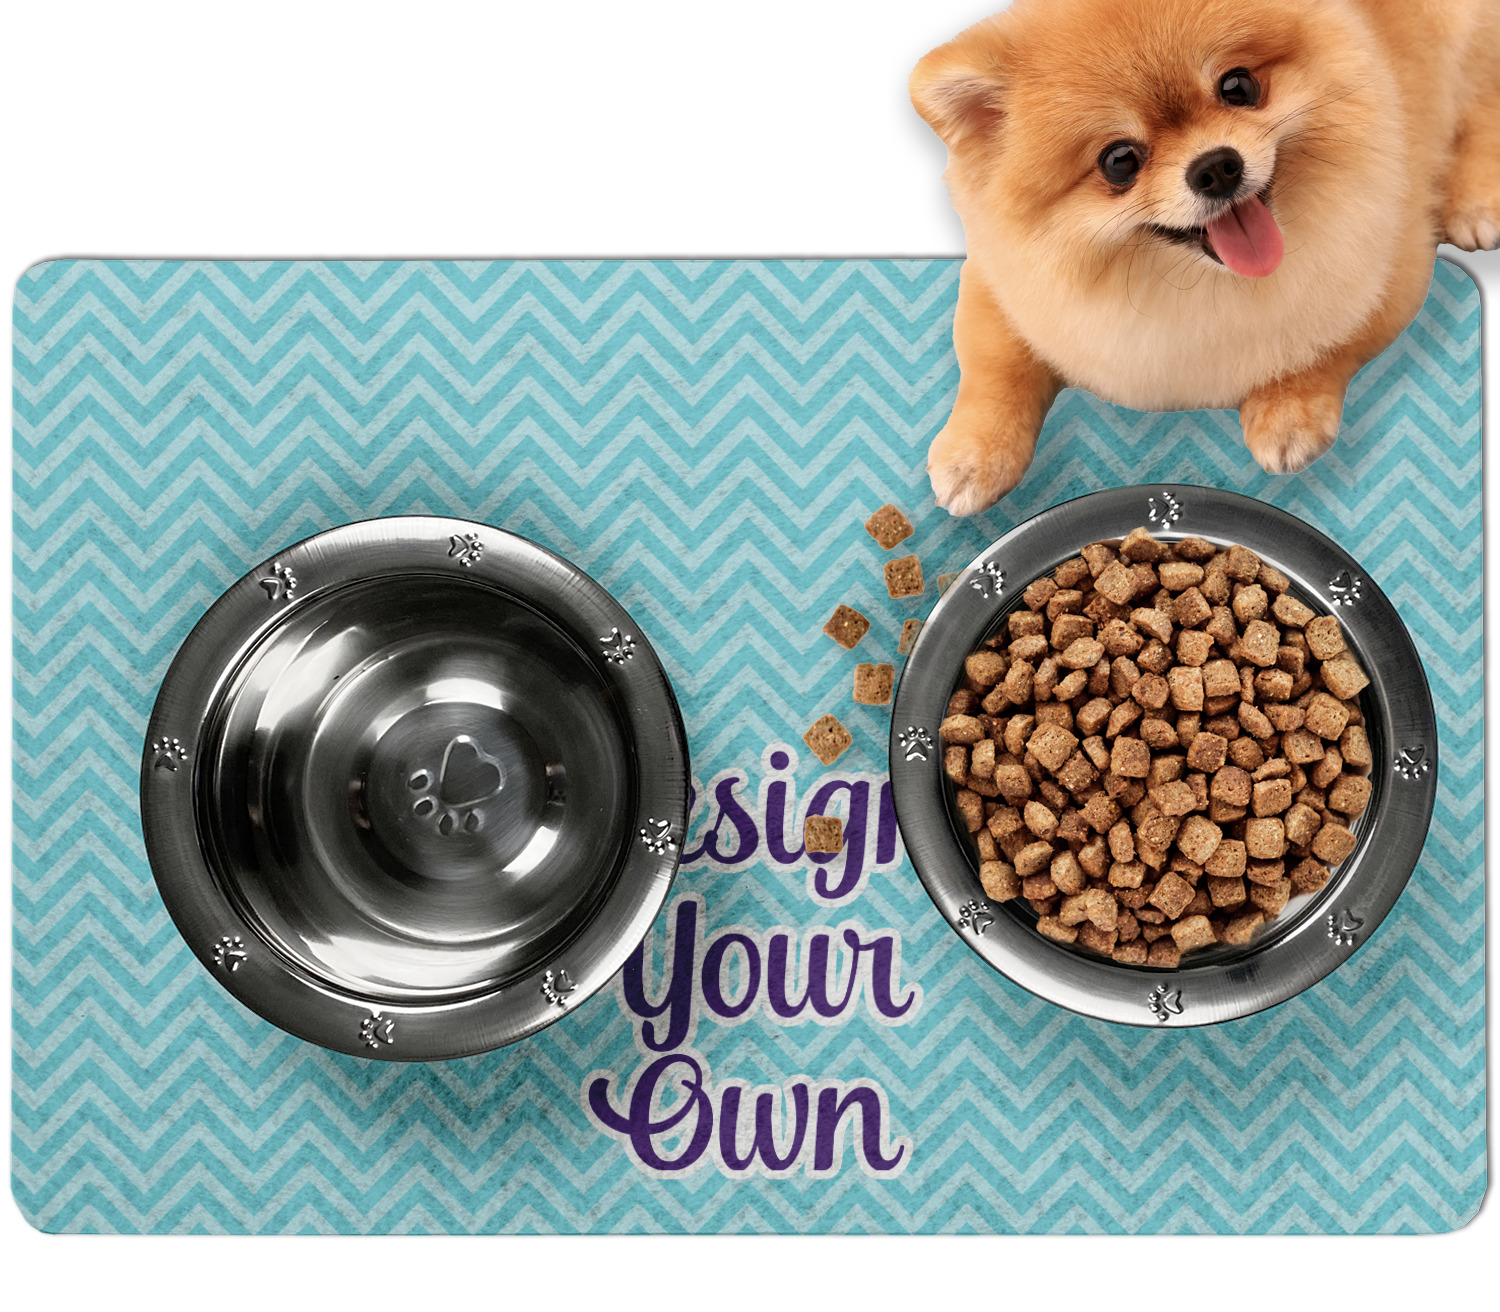 https://www.youcustomizeit.com/common/MAKE/965833/Design-Your-Own-Dog-Food-Mat-Small-LIFESTYLE.jpg?lm=1610743036